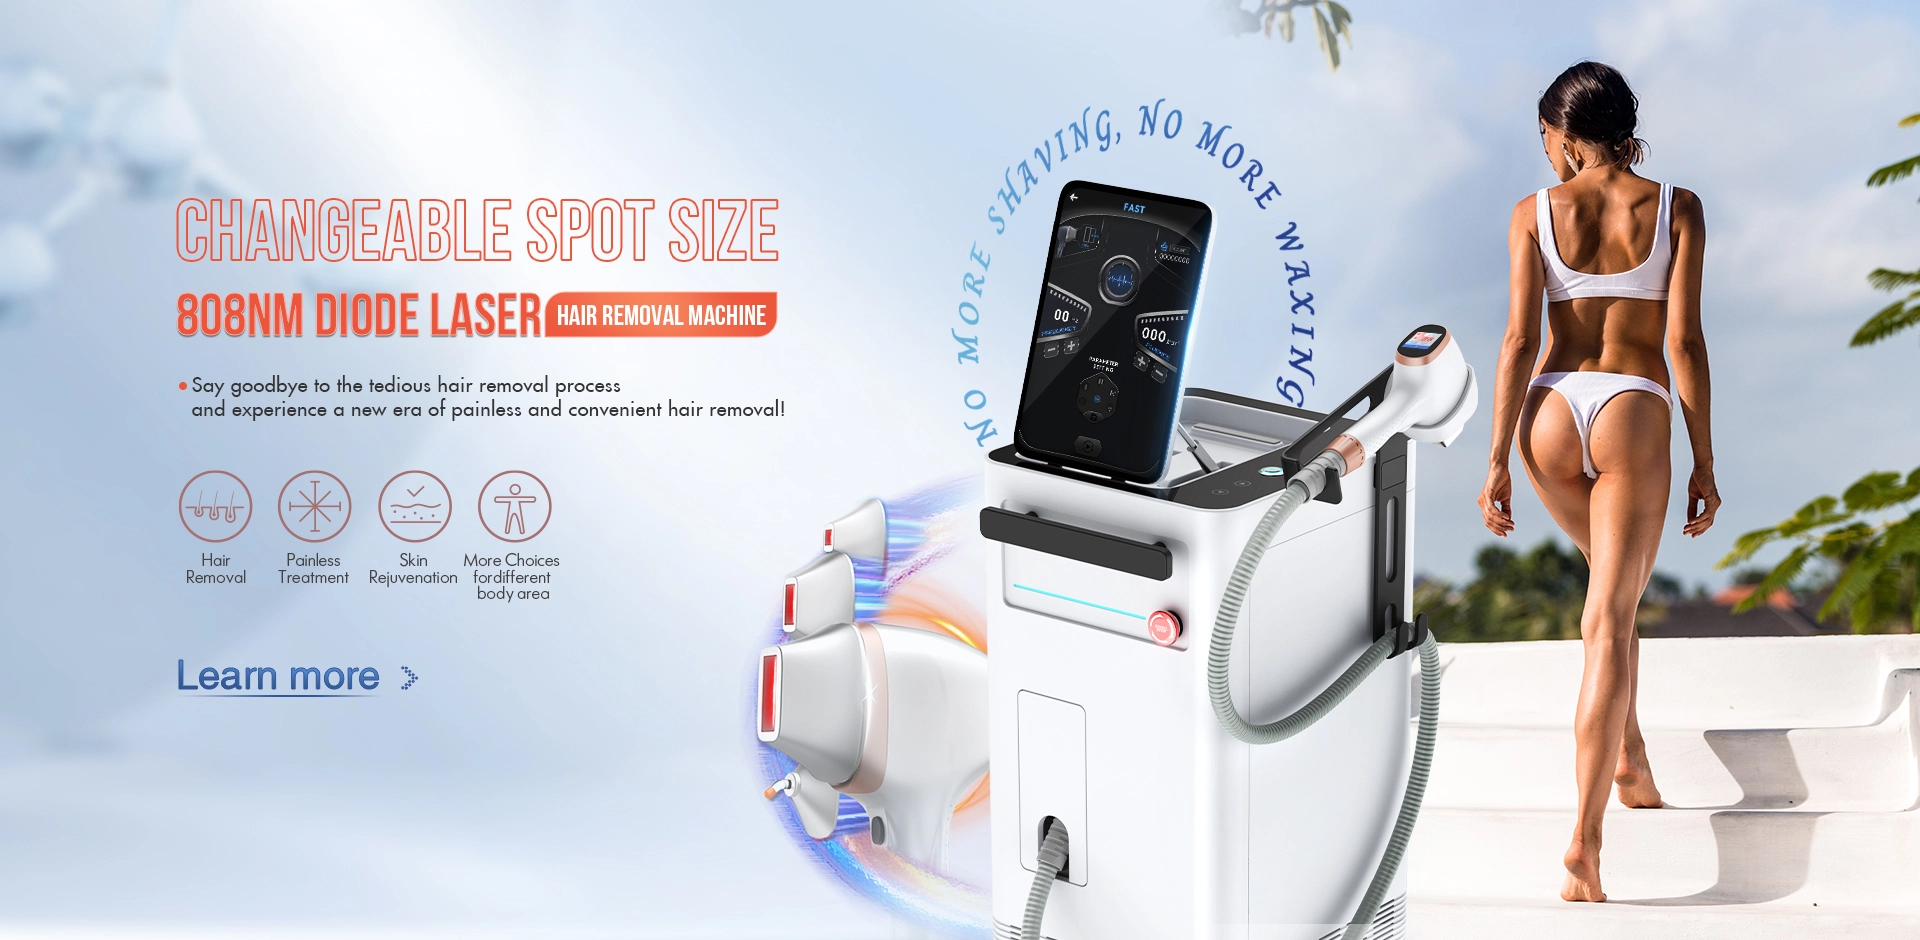 Changeable Spot Size 808nm Diode Laser Hair Removal Machine